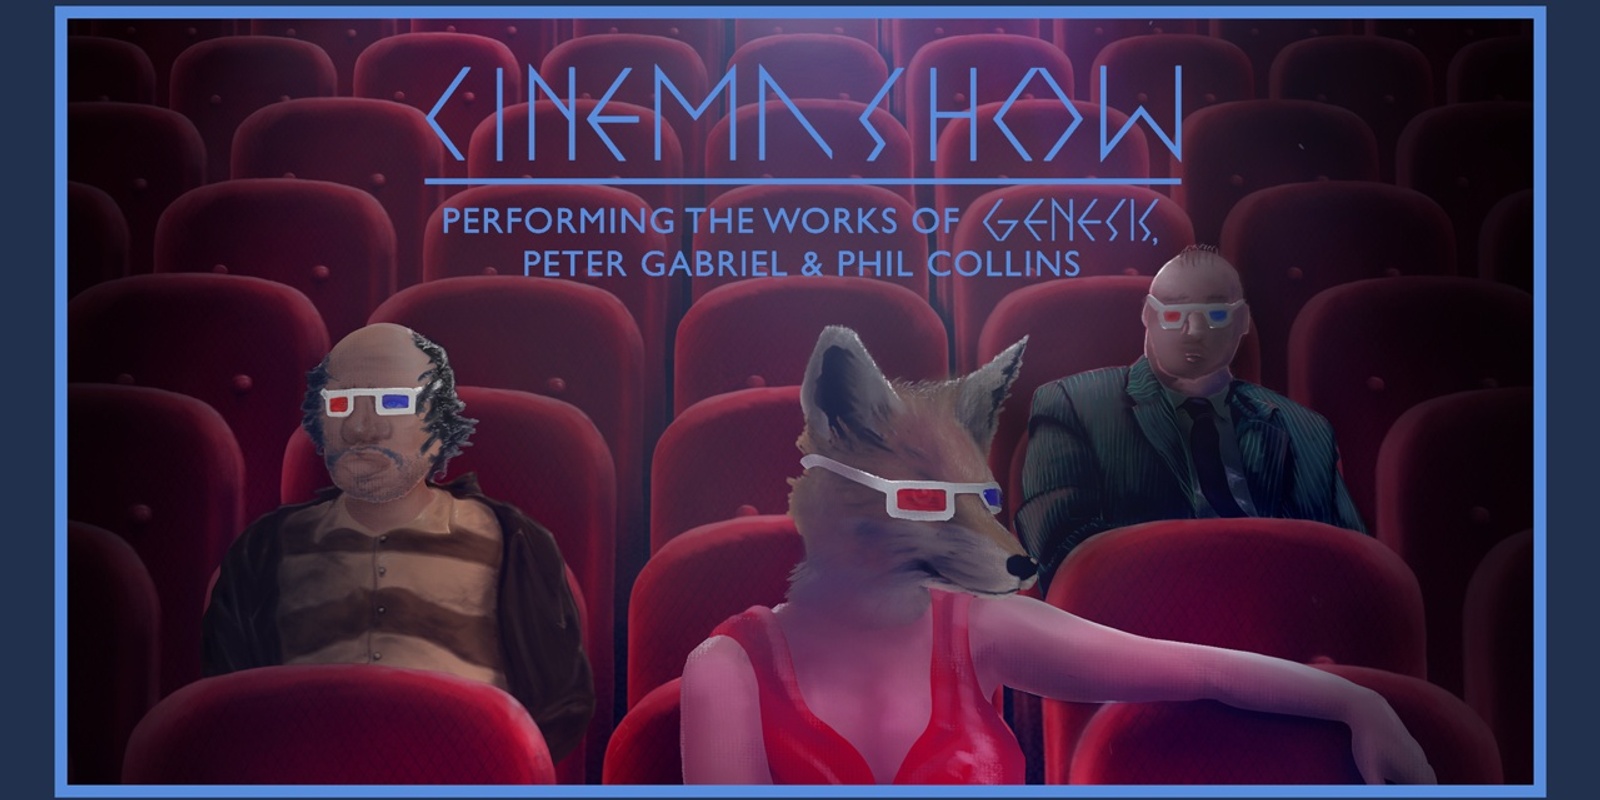 Banner image for Cinema Show - Performing the works of Genesis, Peter Gabriel & Phil Collins